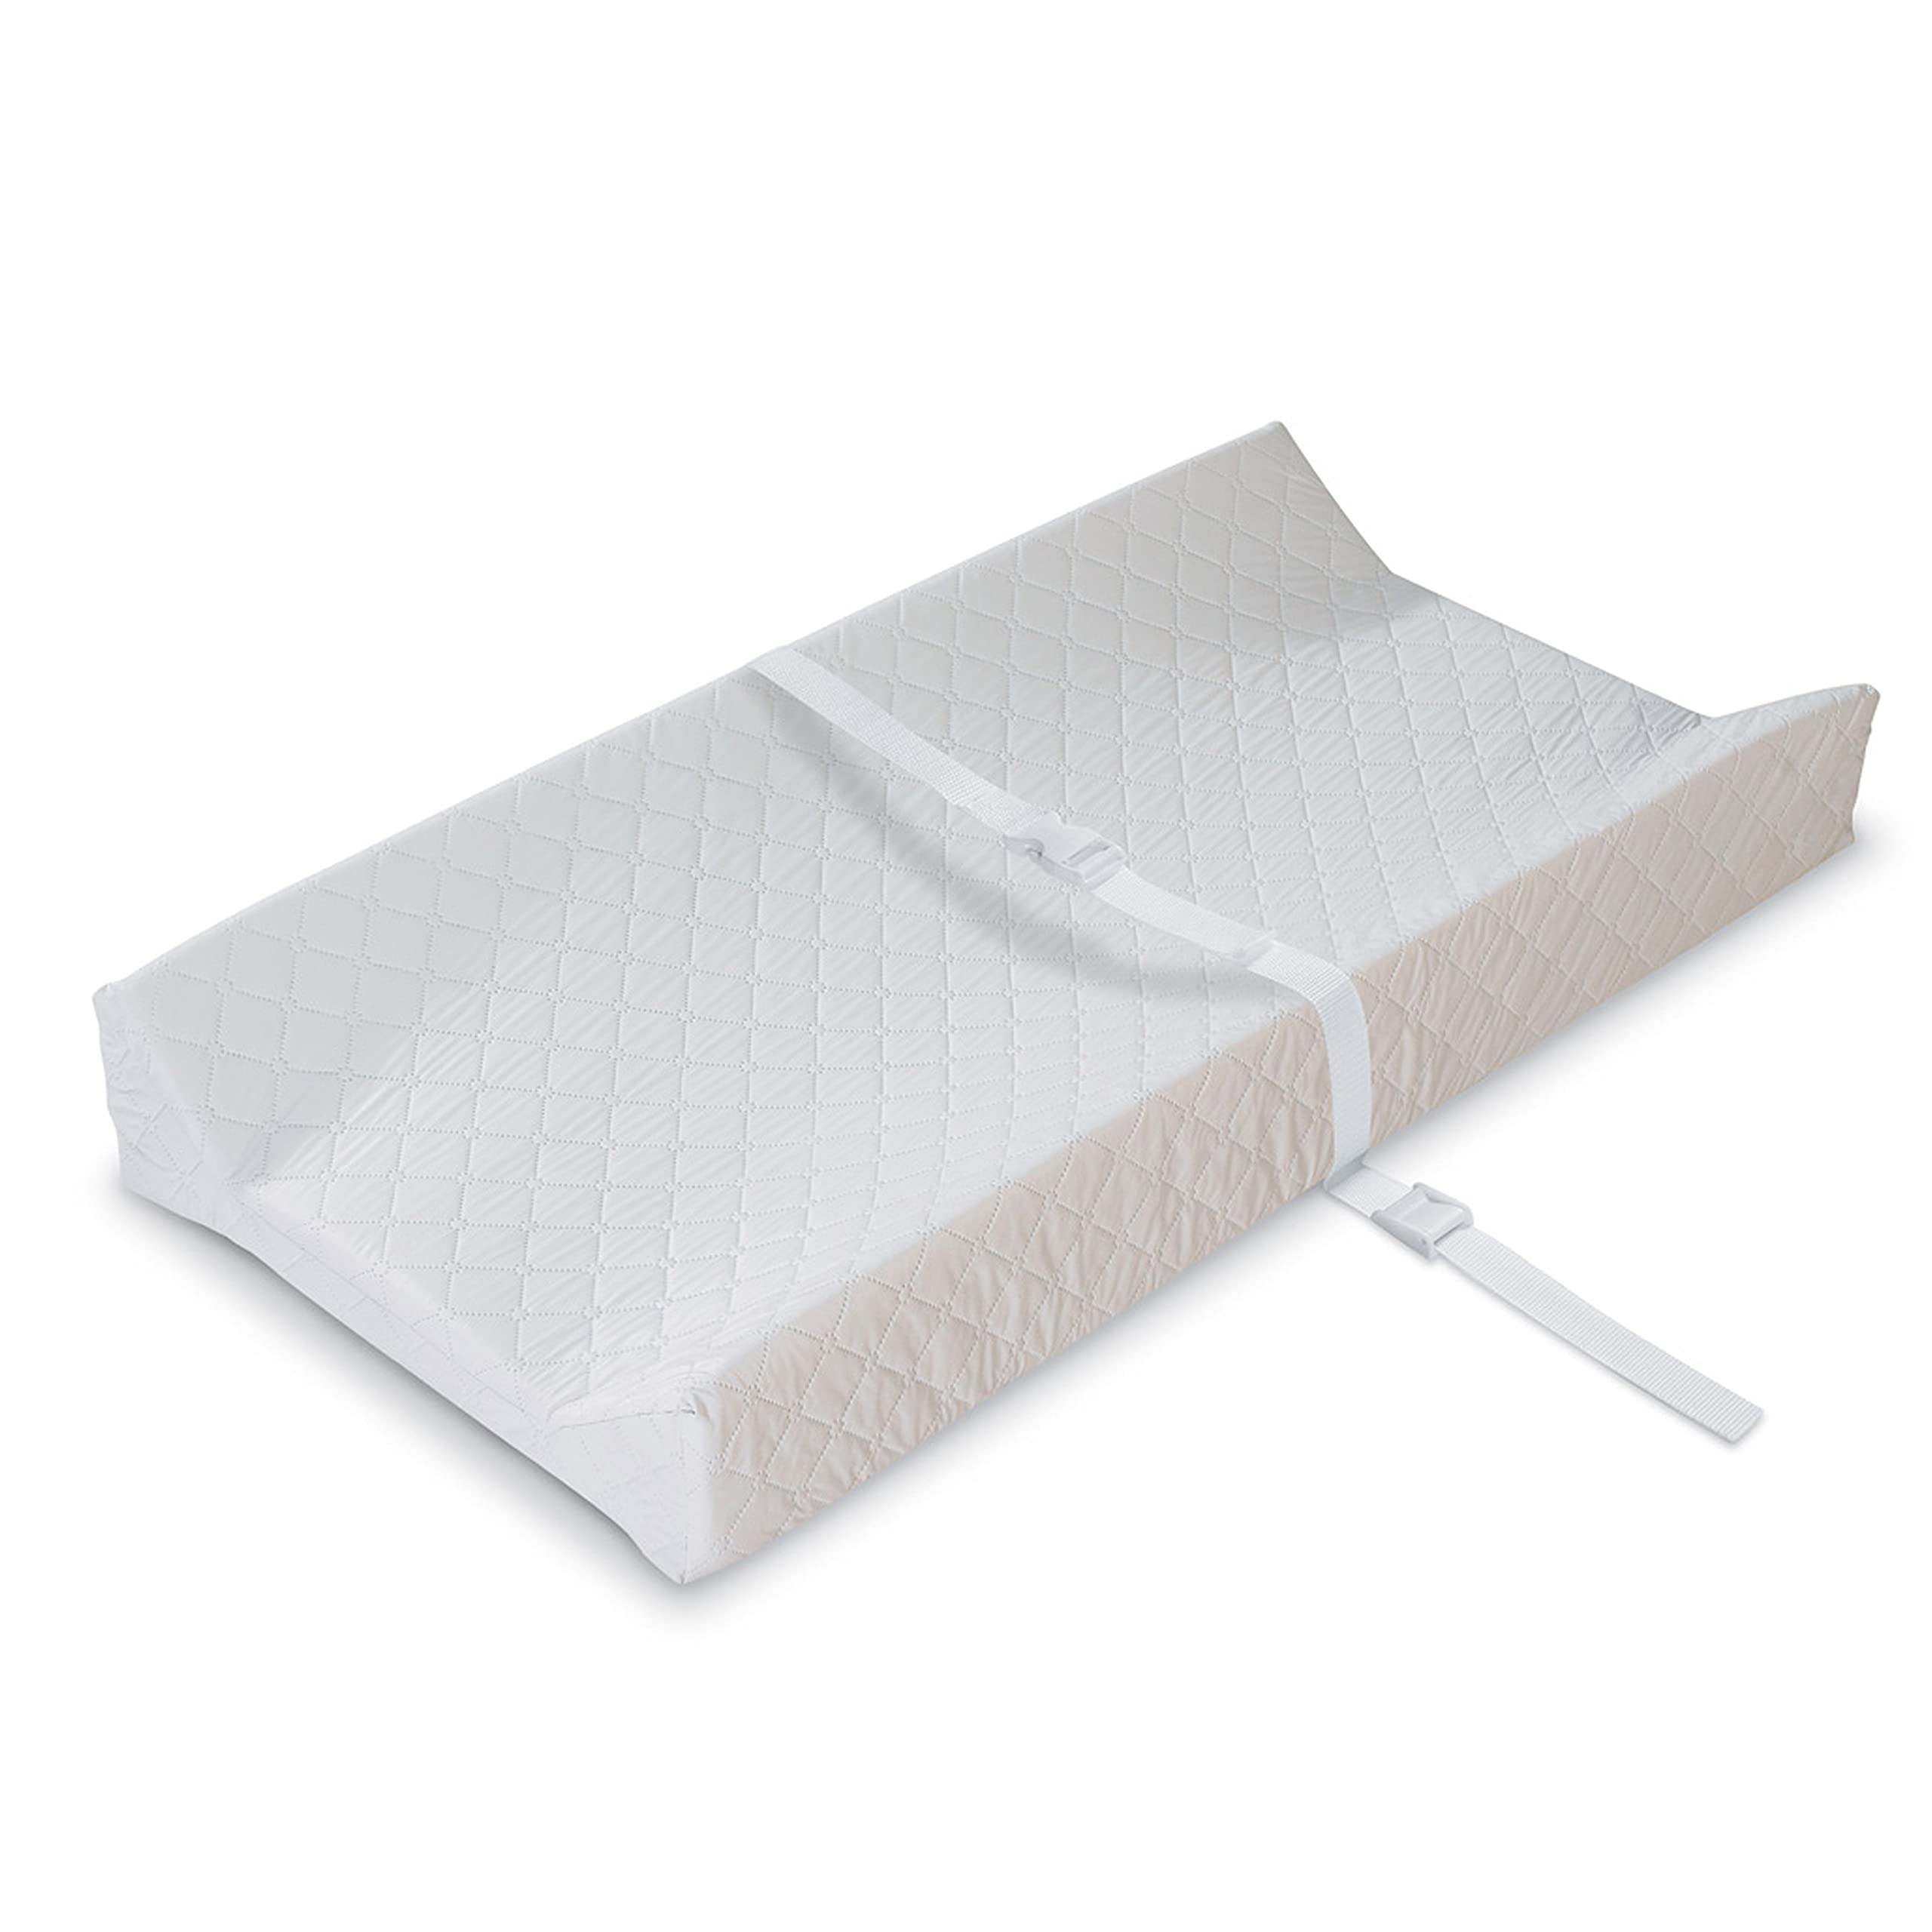 Summer Contoured Changing Pad, 16 x 32 – Comfortable & Secure, With Security Strap And Two High Curved Sides, Easy To Clean